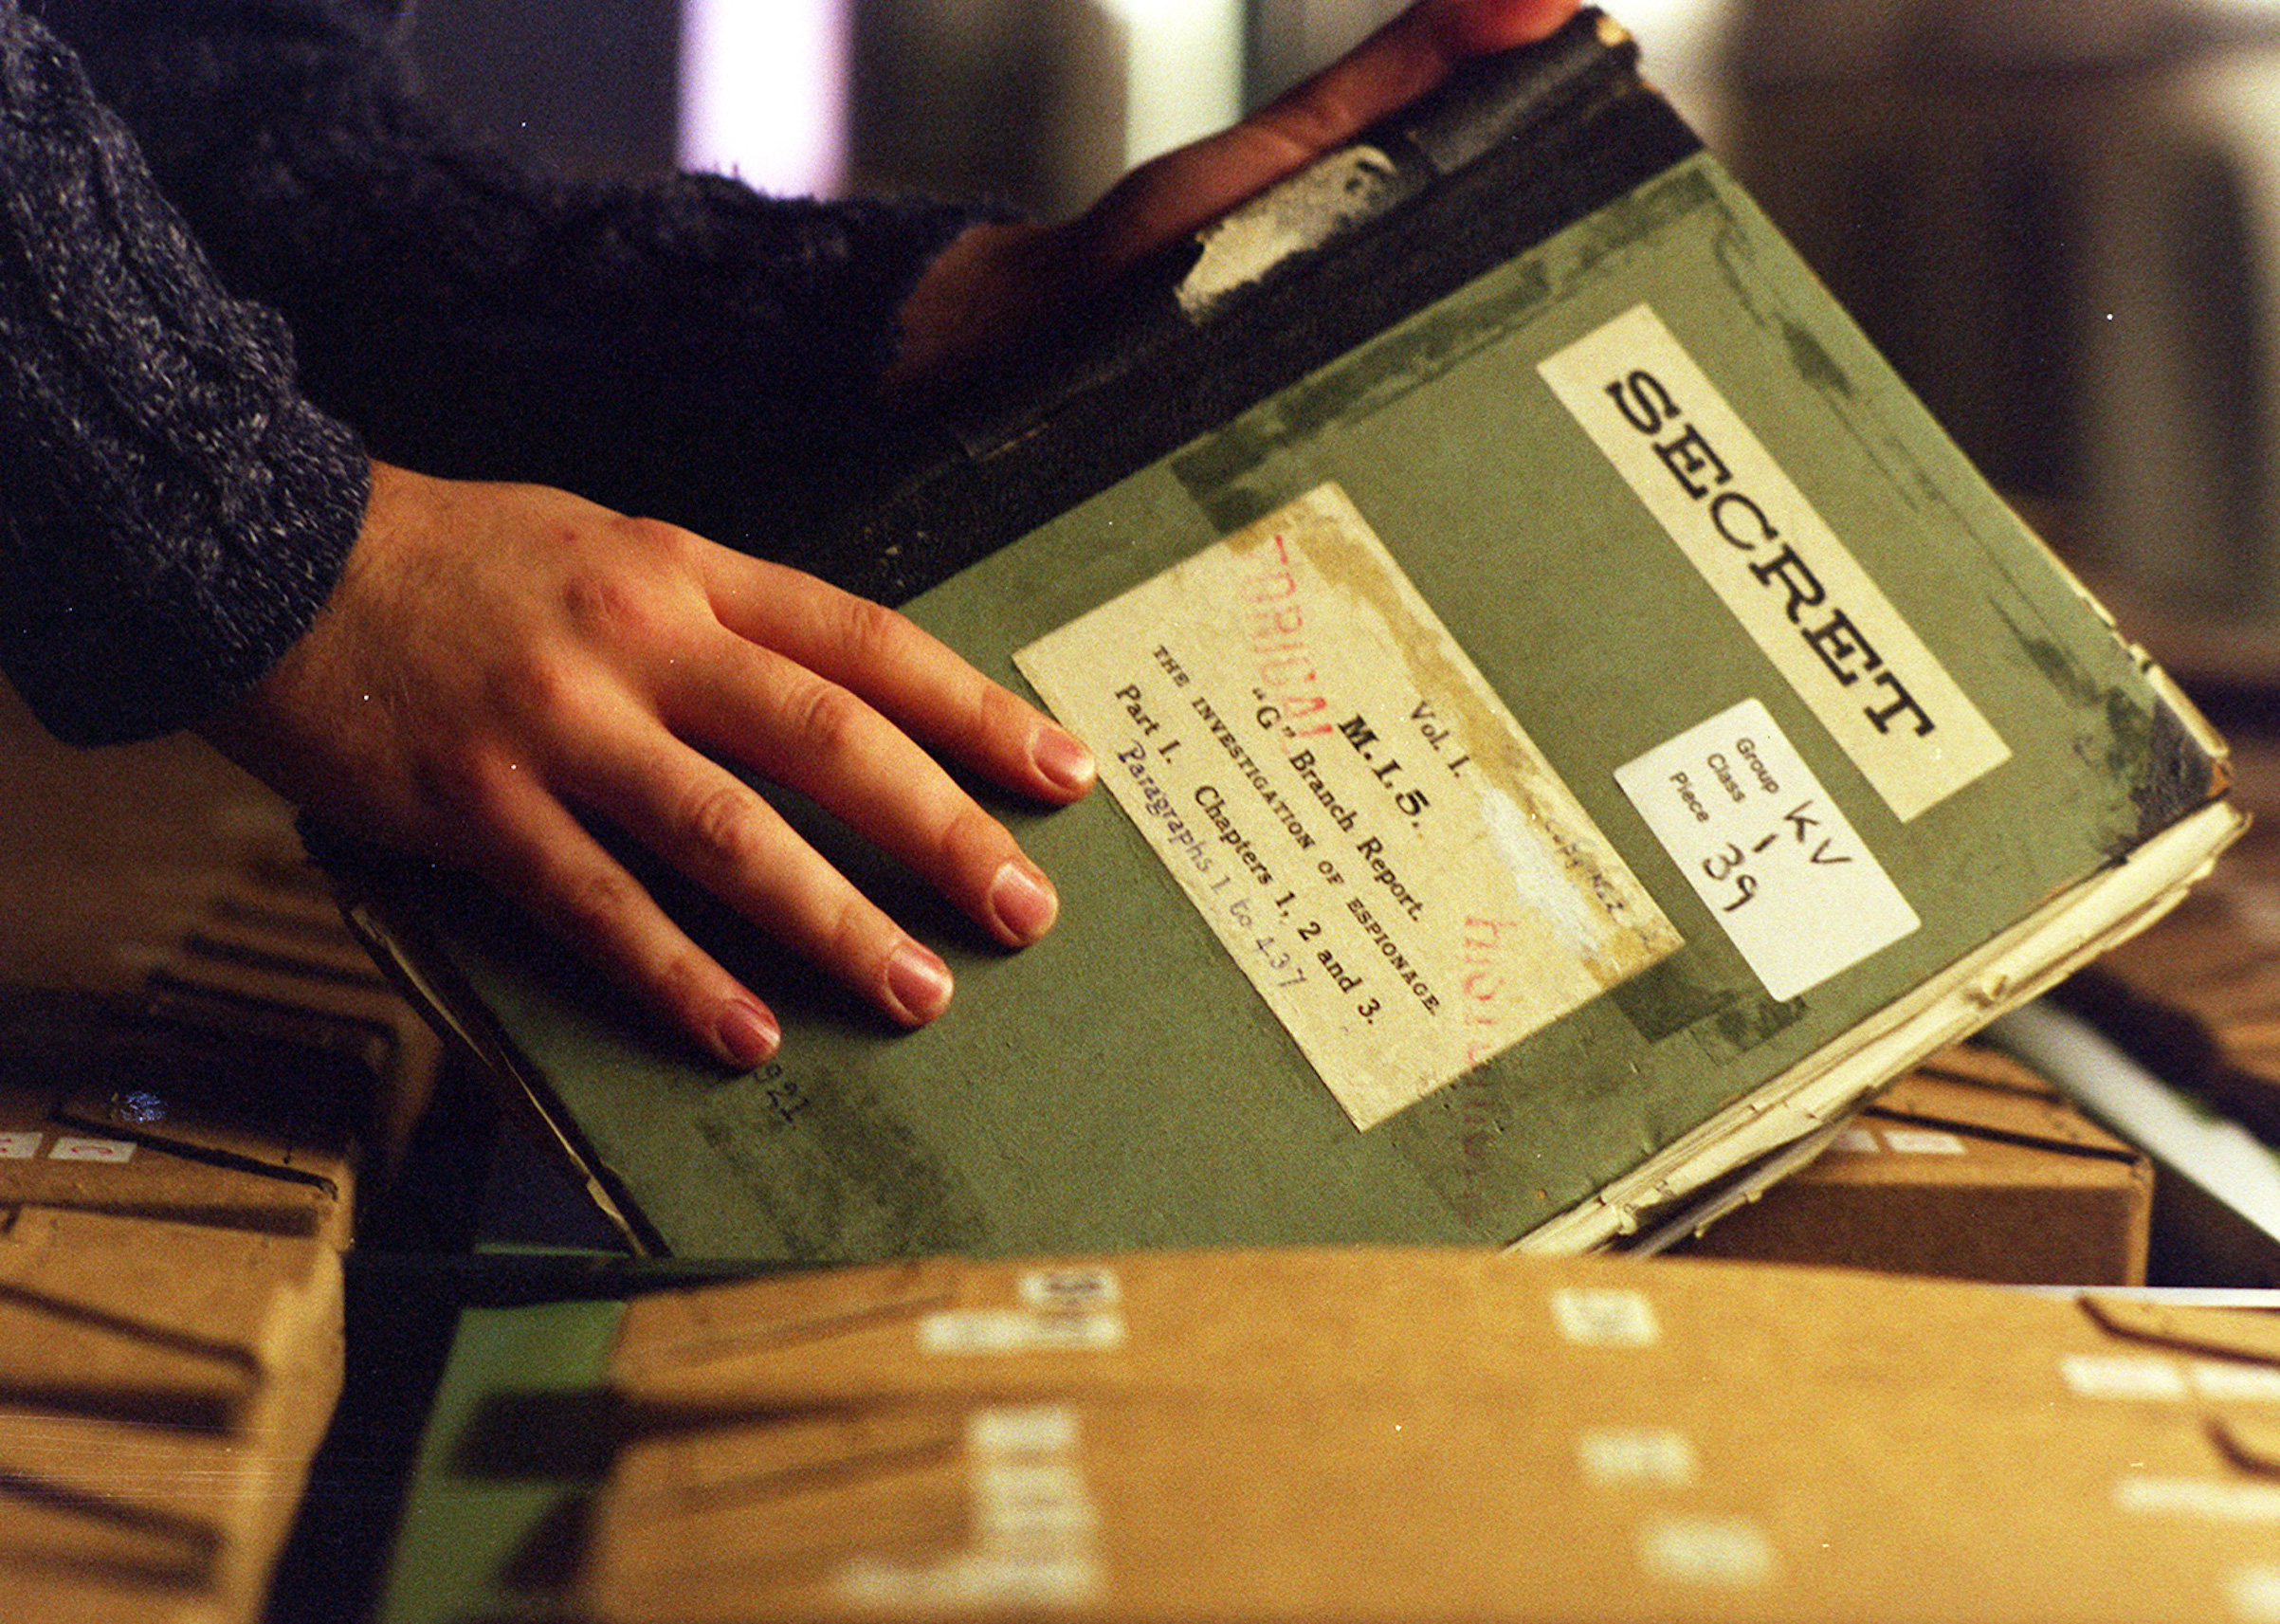 A secret MI5 files released to the Public Records Office, in Kew, London on Nov. 17, 1997. (Jason Bye—PA Images/Getty Images)